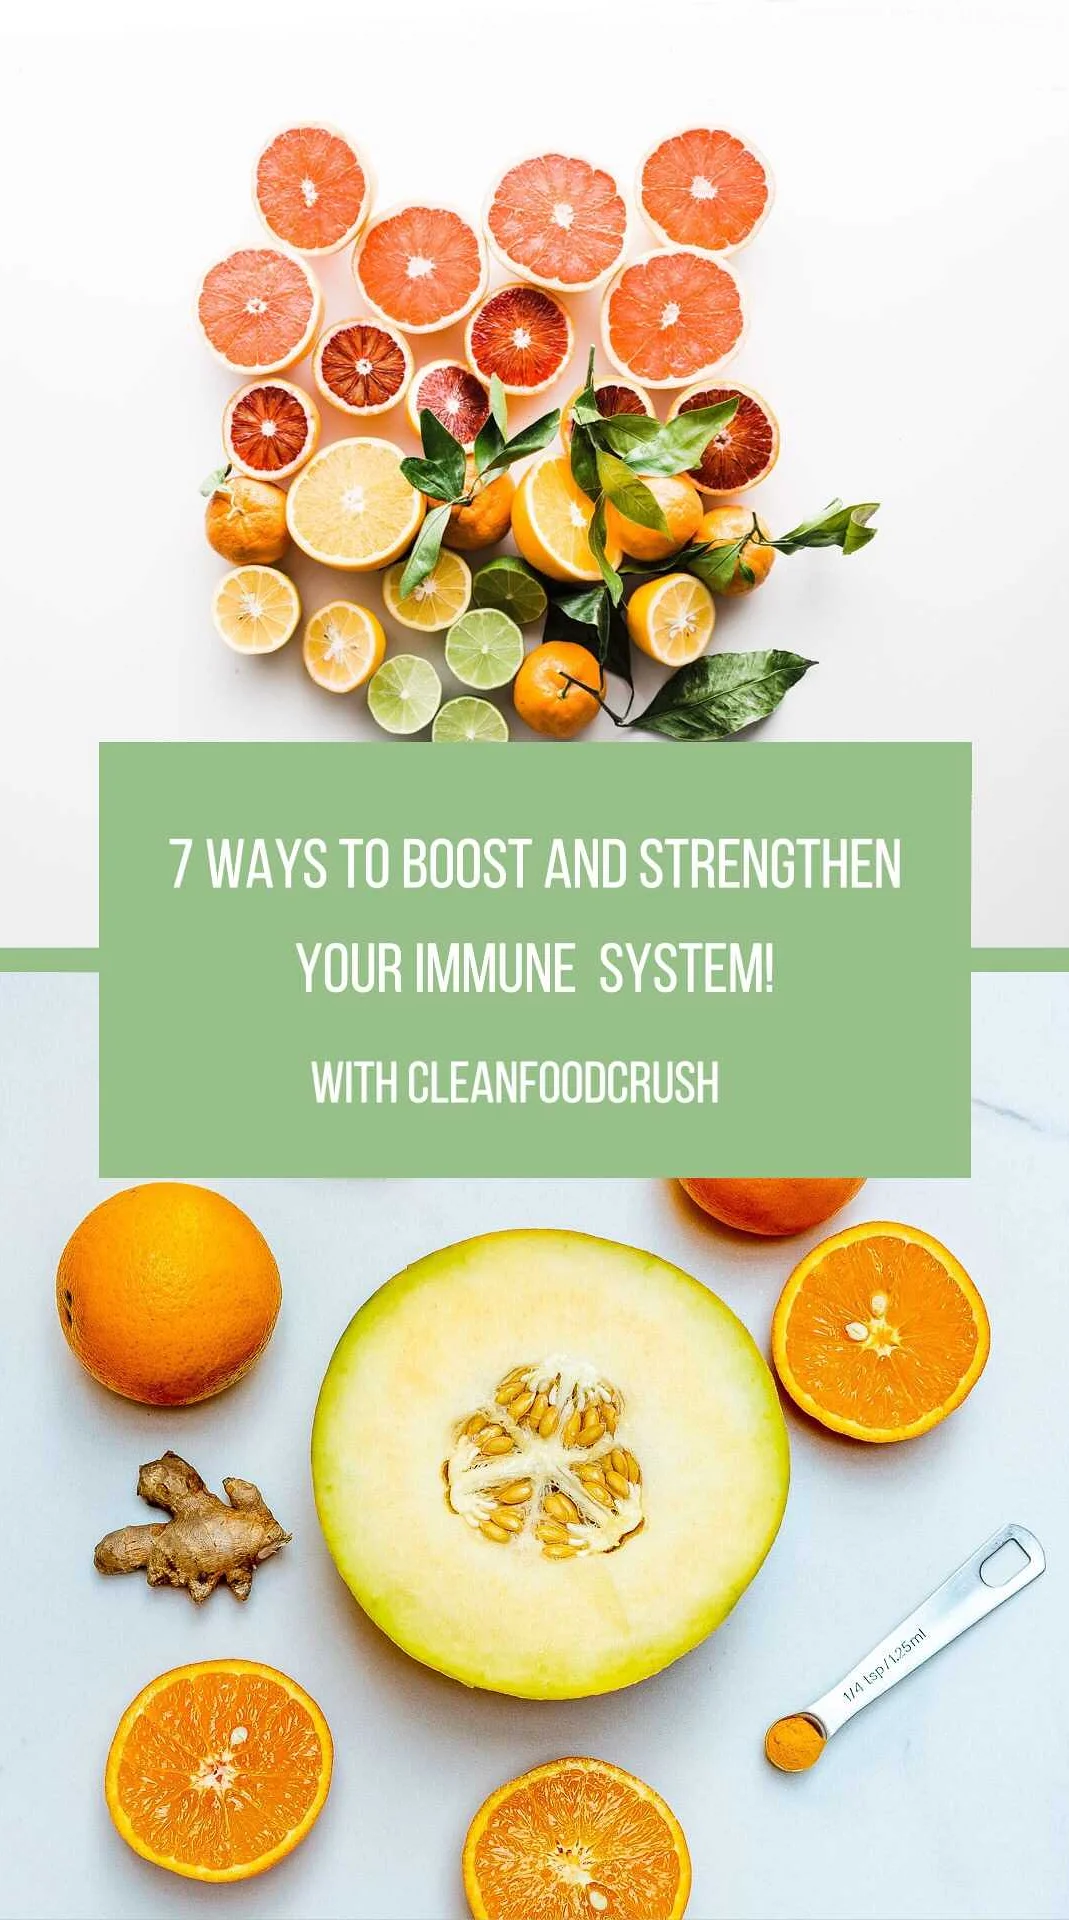 Get Regular Exercise to Boost Your Immune System